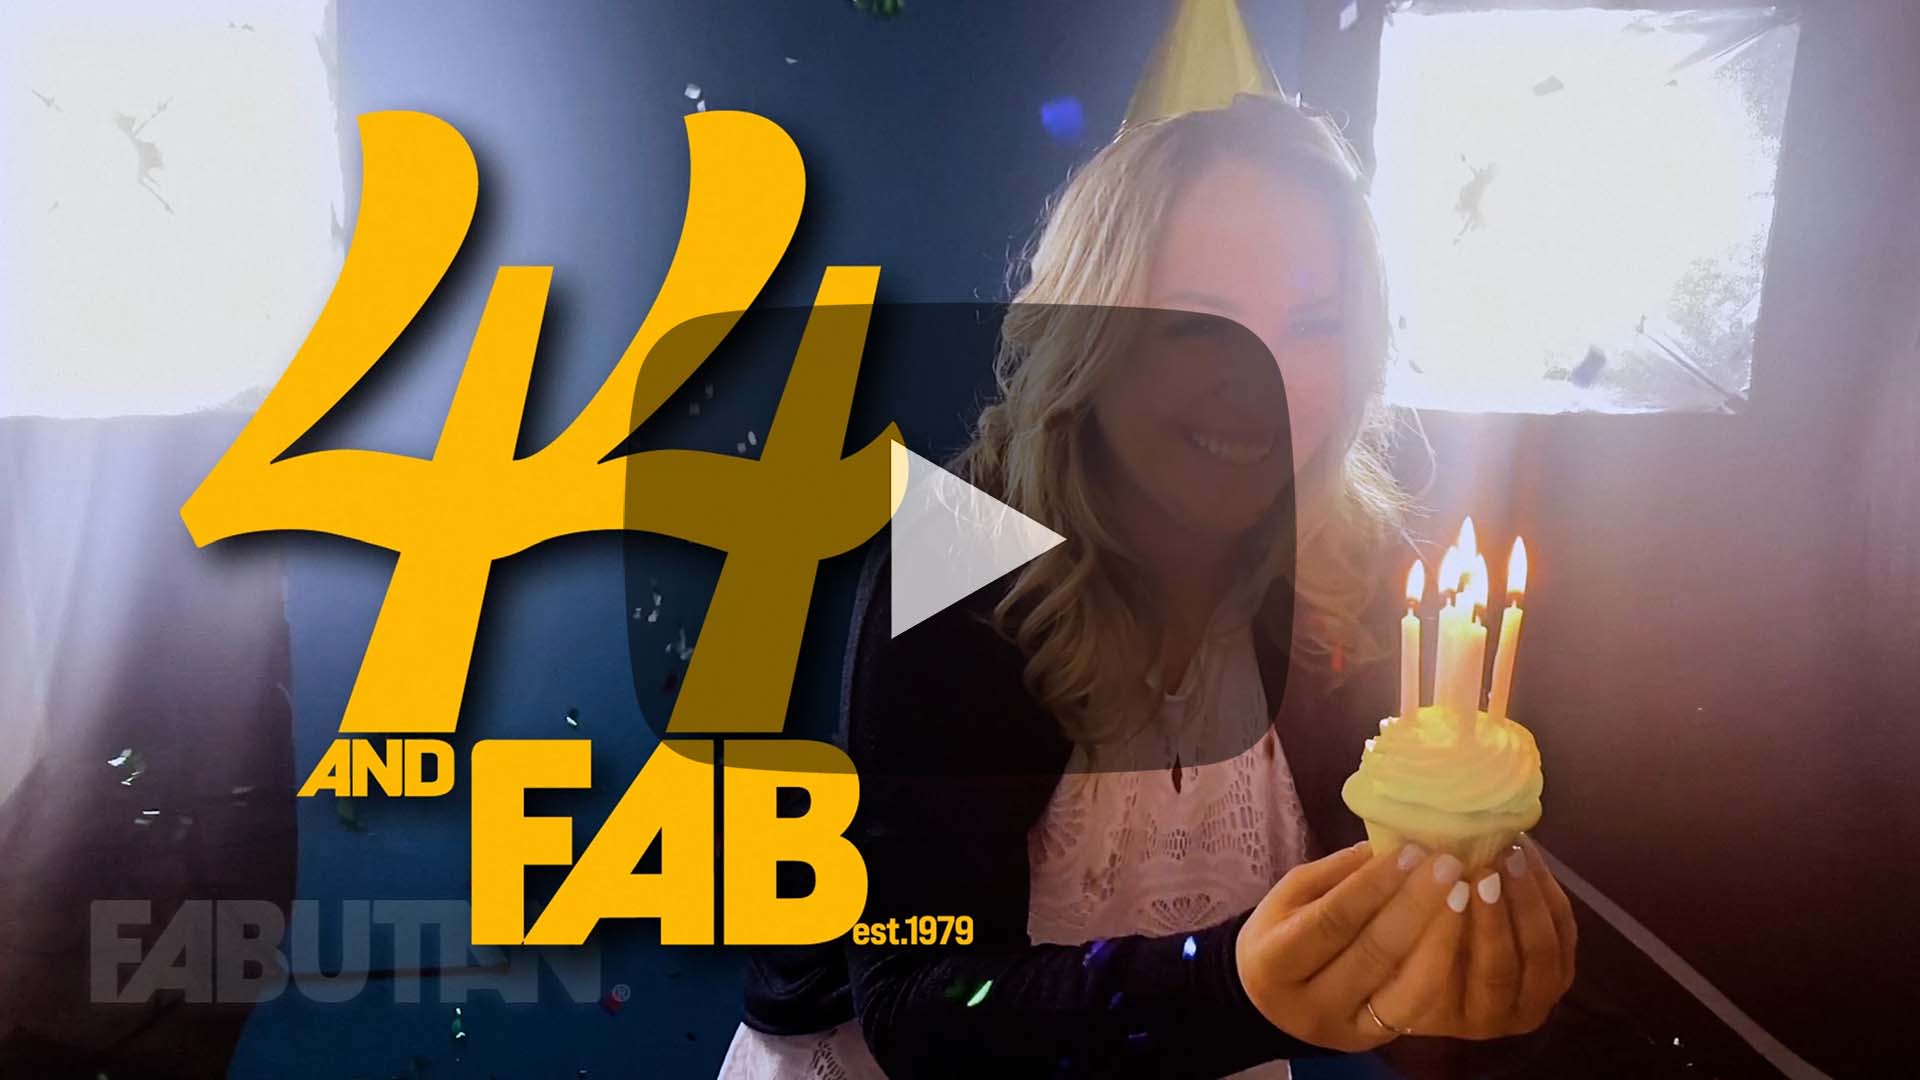 Watch our 44 and Fab video on YouTube